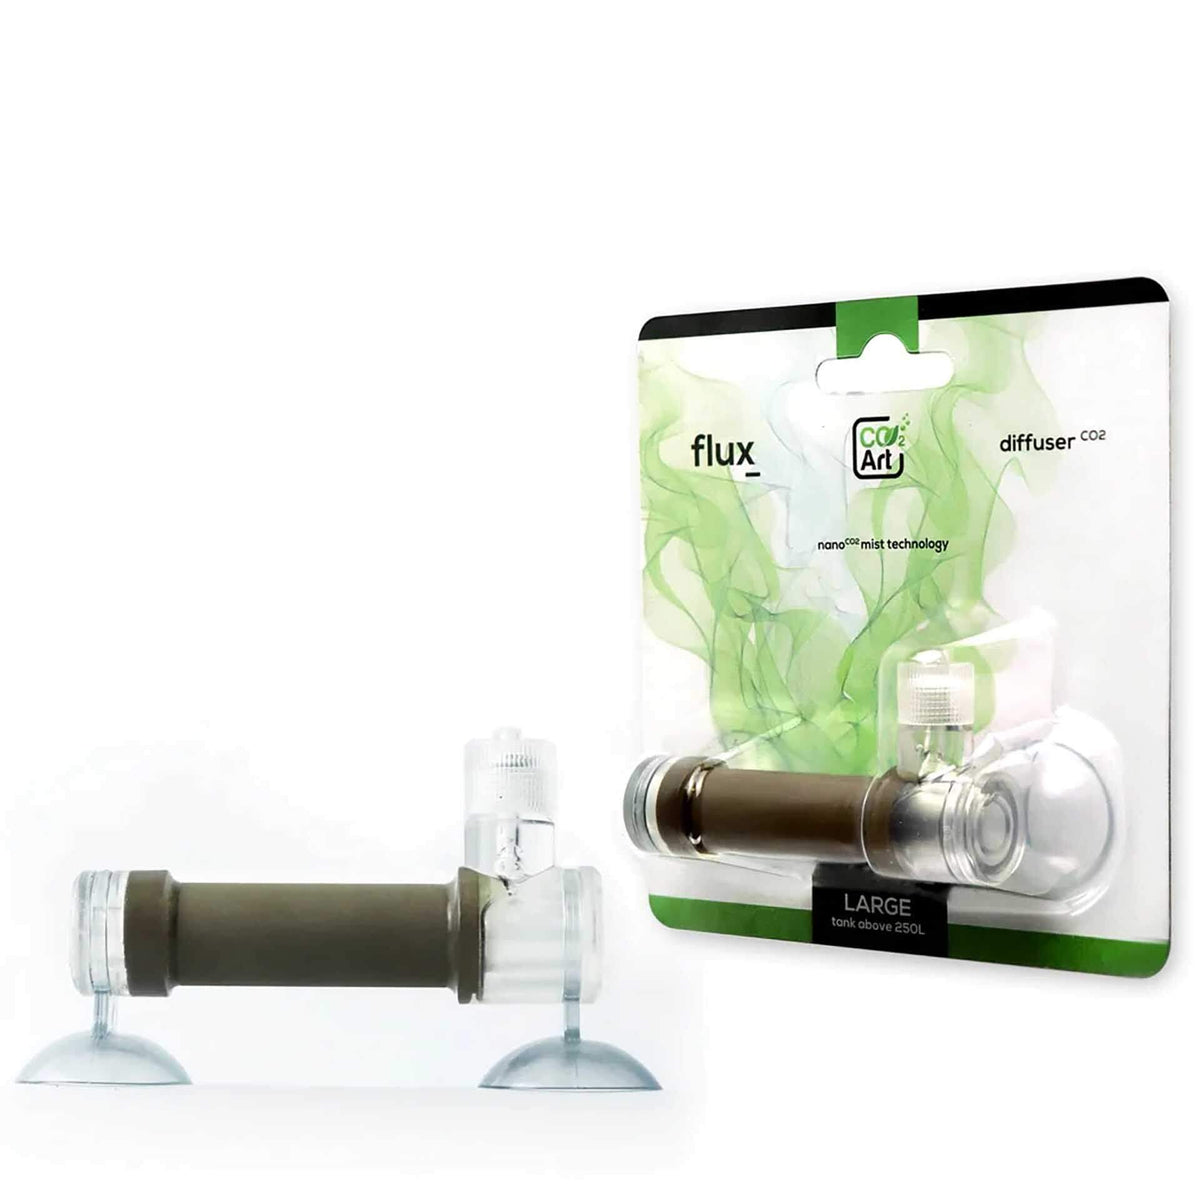 CO2 Art In-Tank Bazooka Flux CO2 Diffuser - Large (Over 250L)